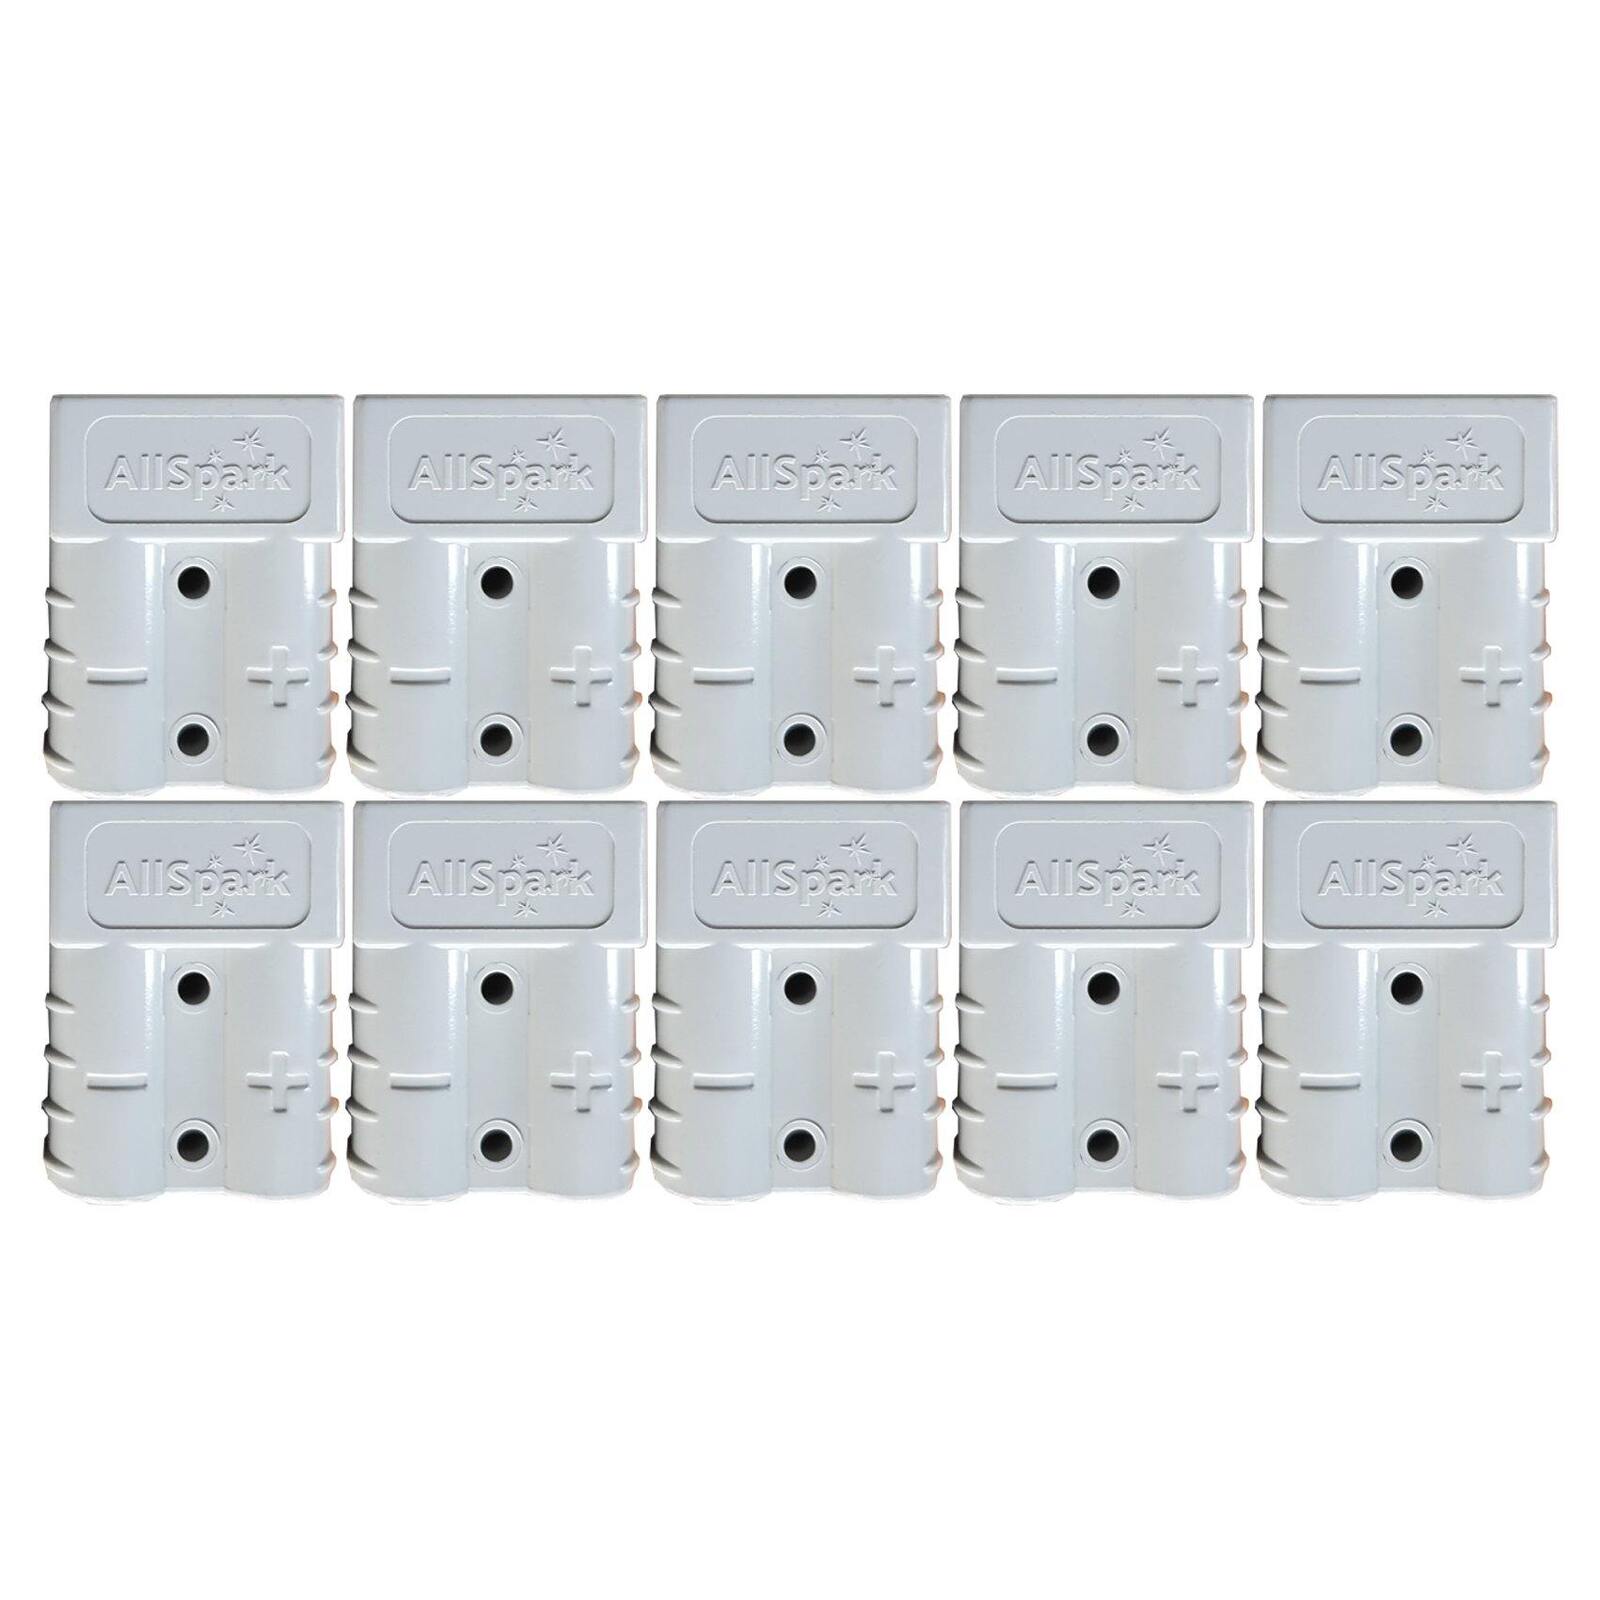 AllSpark 50A Anderson Style Plug Connector Single - 10 pack 8 AWG